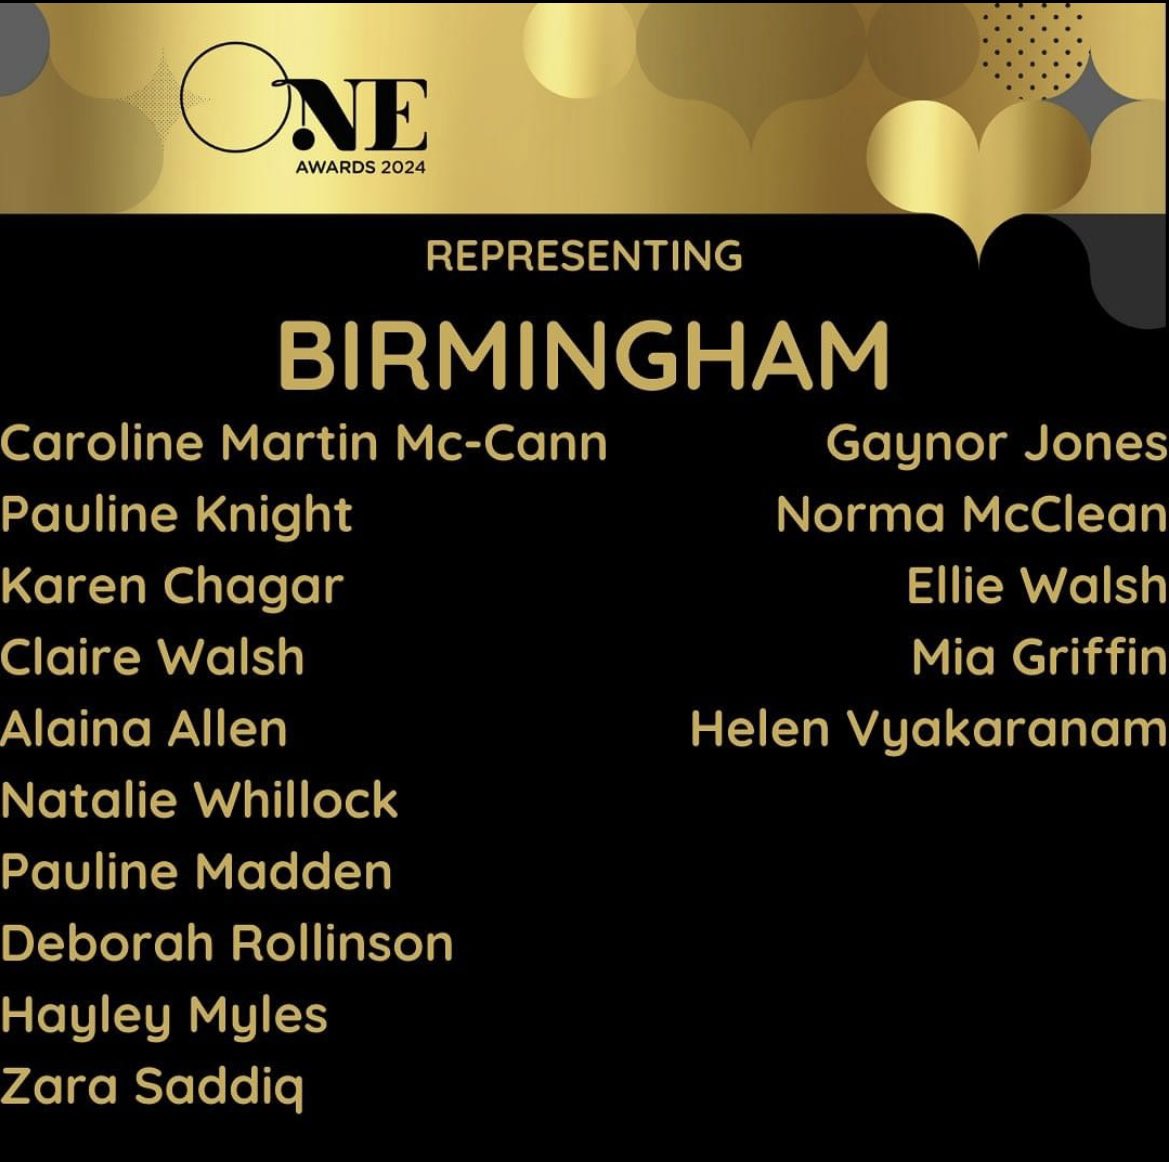 Congratulations to our Gaynor Jones on being nominated for the regional ONE award! 👏👌🏐